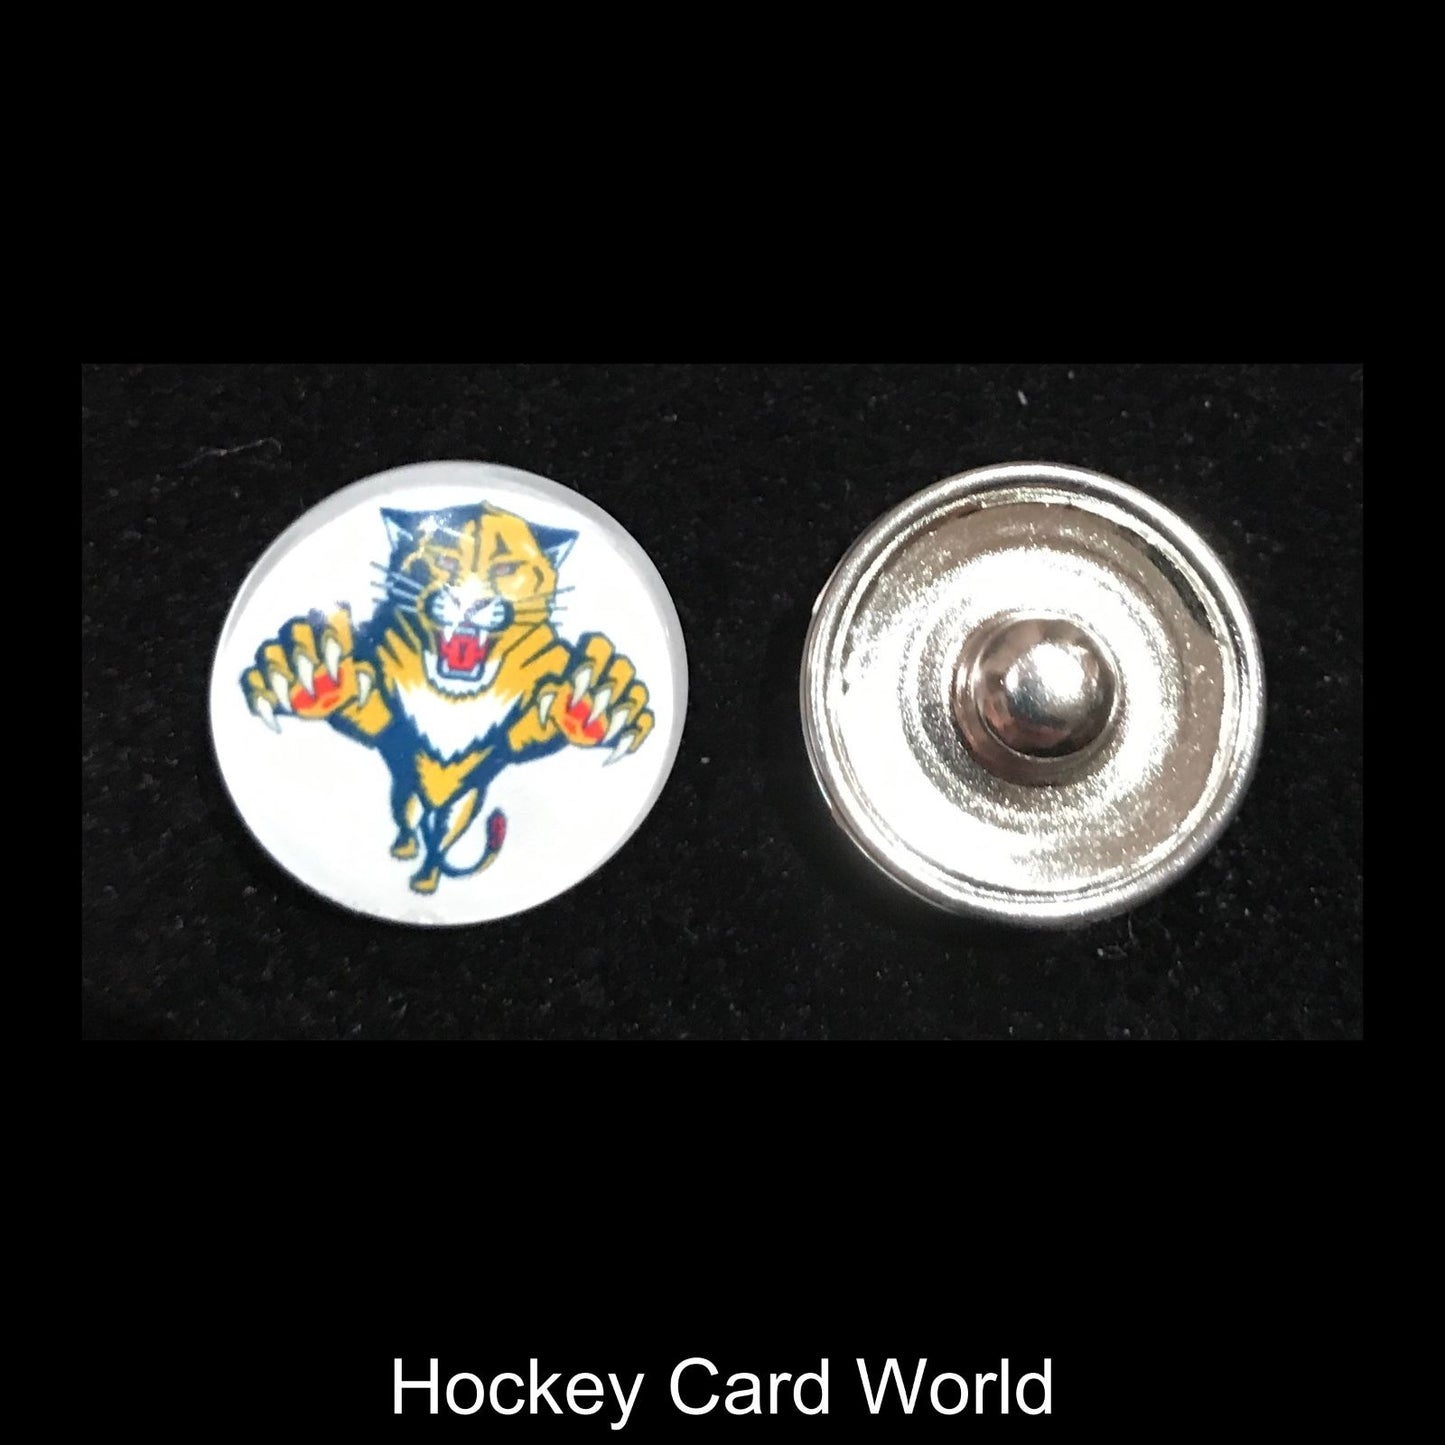  Florida Panthers NHL Snap Ginger Button Jewelry for Jackets, Bracelets. Image 1